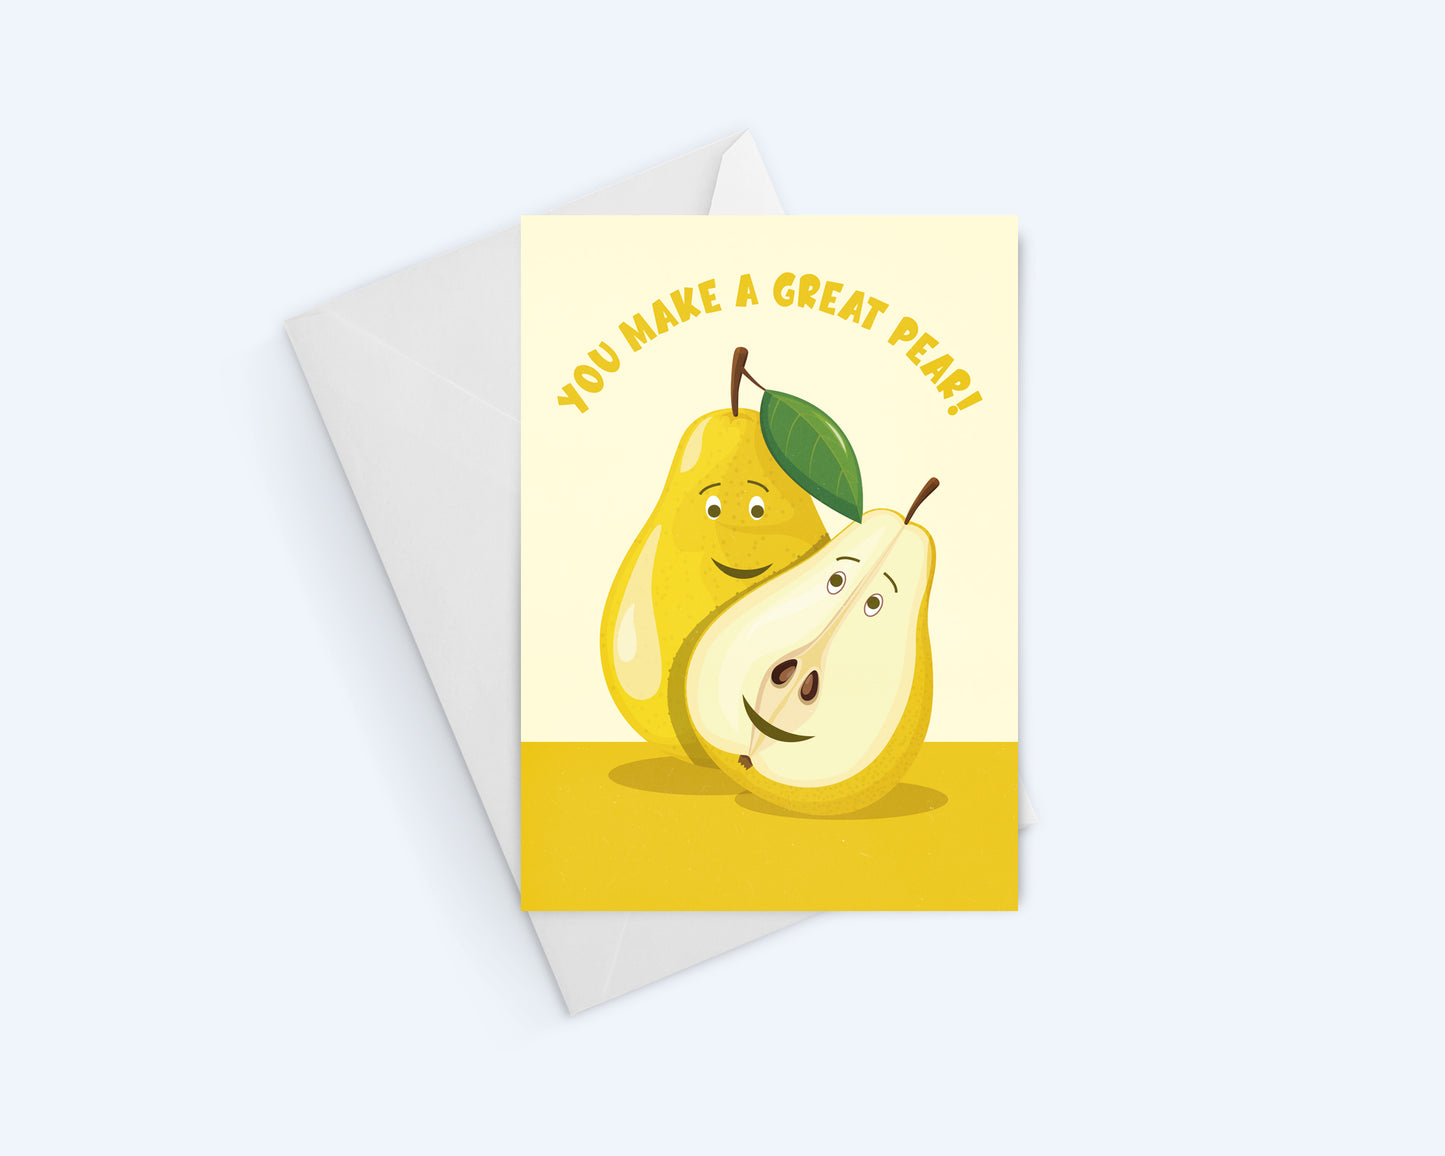 You Make a Great Pear!